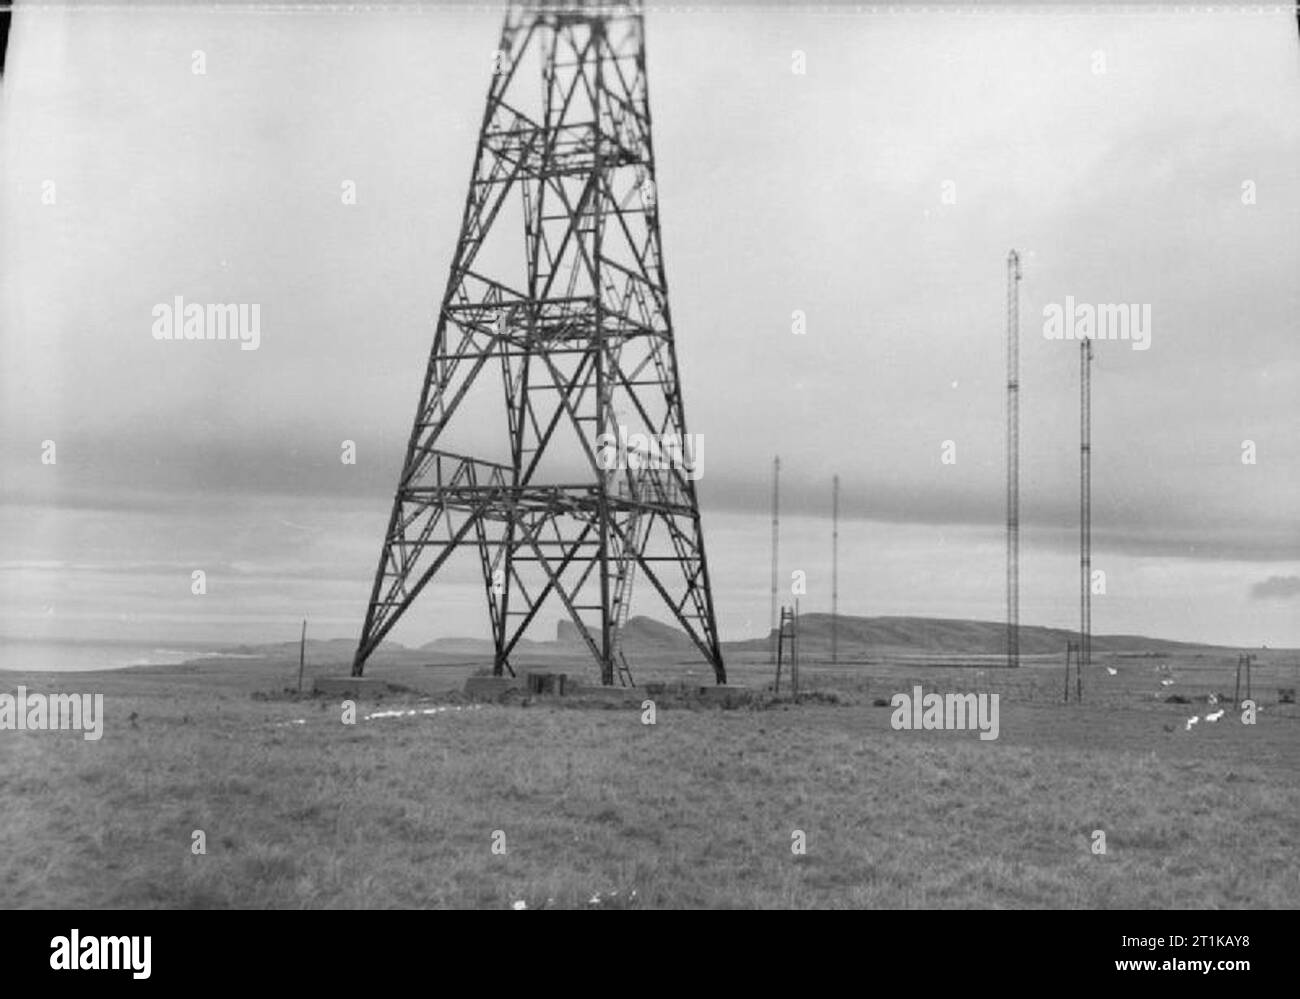 Royal Air Force Radar, 1939-1945 Chain Home: AMES Type 1 CH West Coast installation at Saligo Bay, Islay, Inner Hebrides. In the foreground is one of the 240ft wooden receiver towers, and, in the background, two pairs of 325ft guyed steel masts from which the transmitter aerials were suspended. Stock Photo